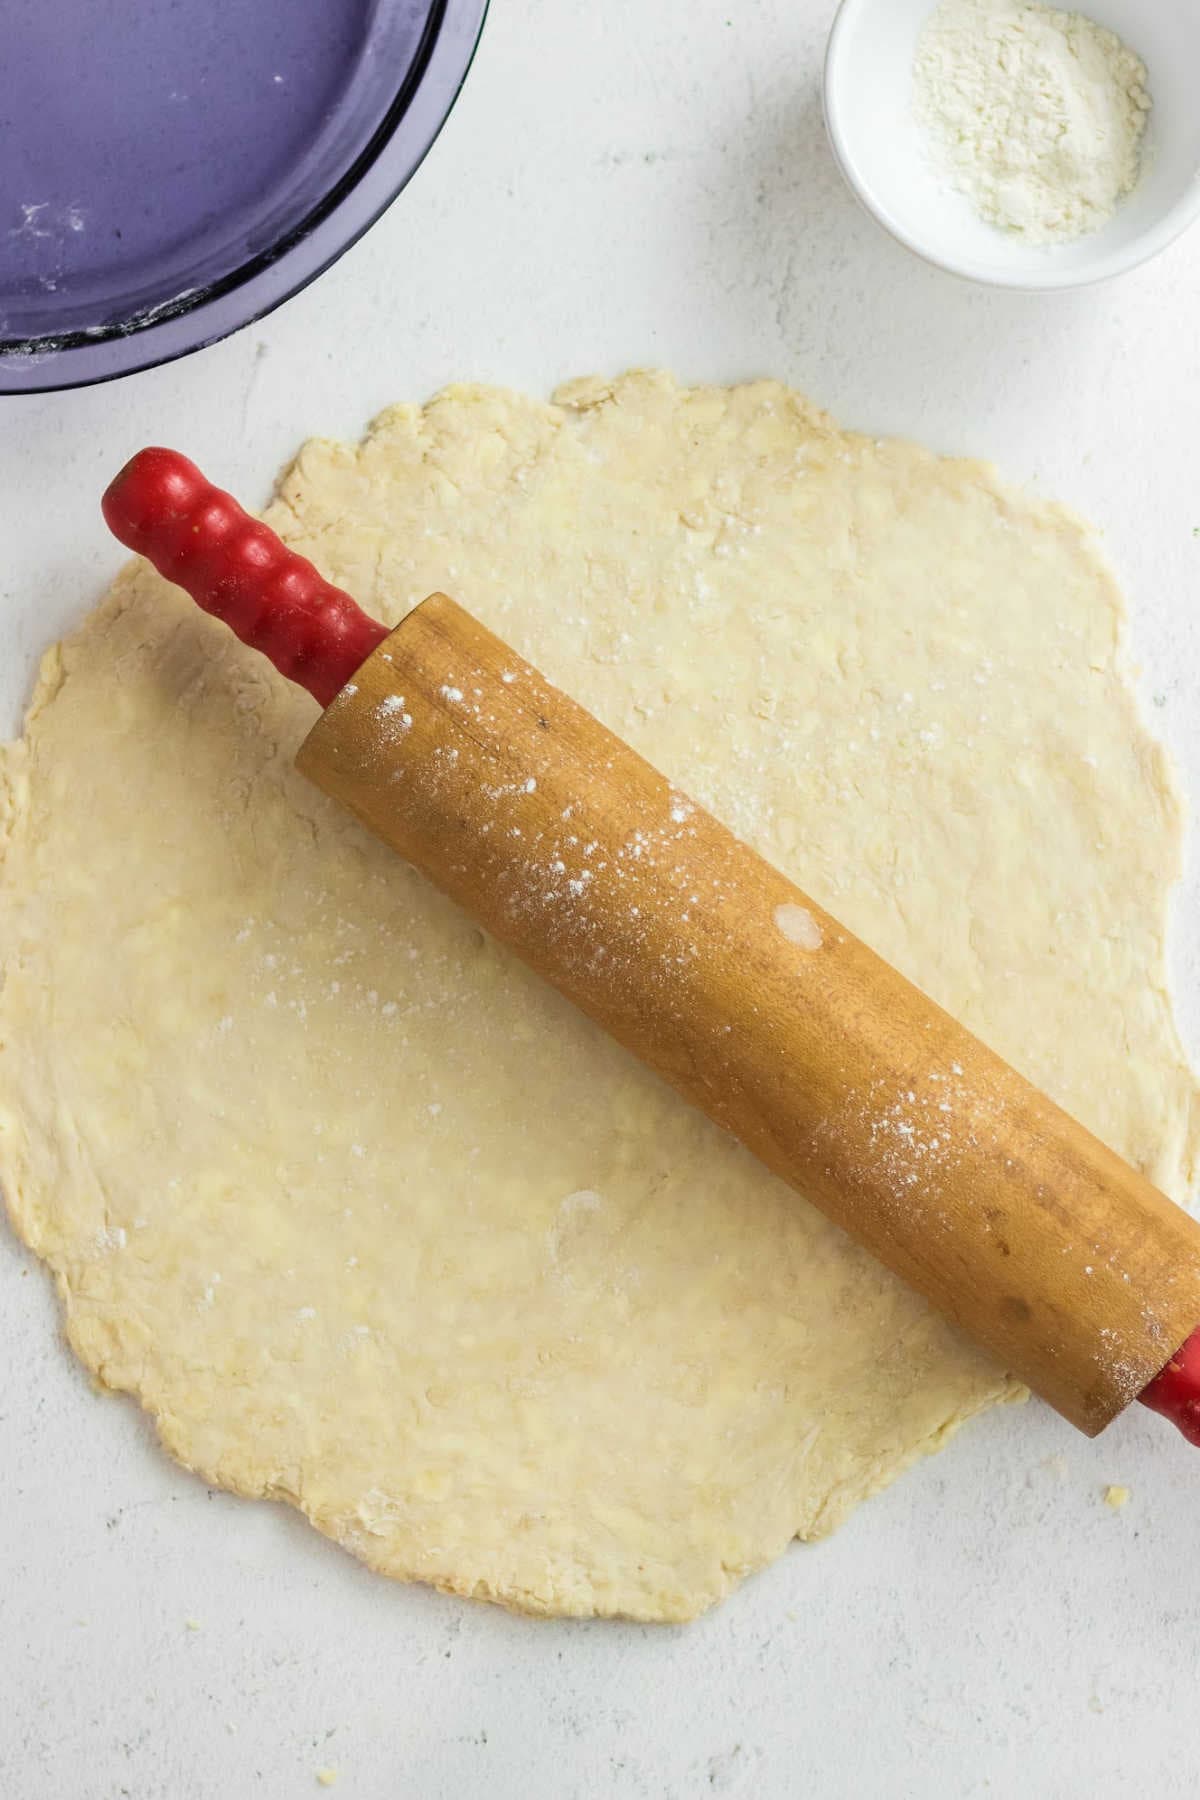 Dough rolled out with a rolling pin on top.